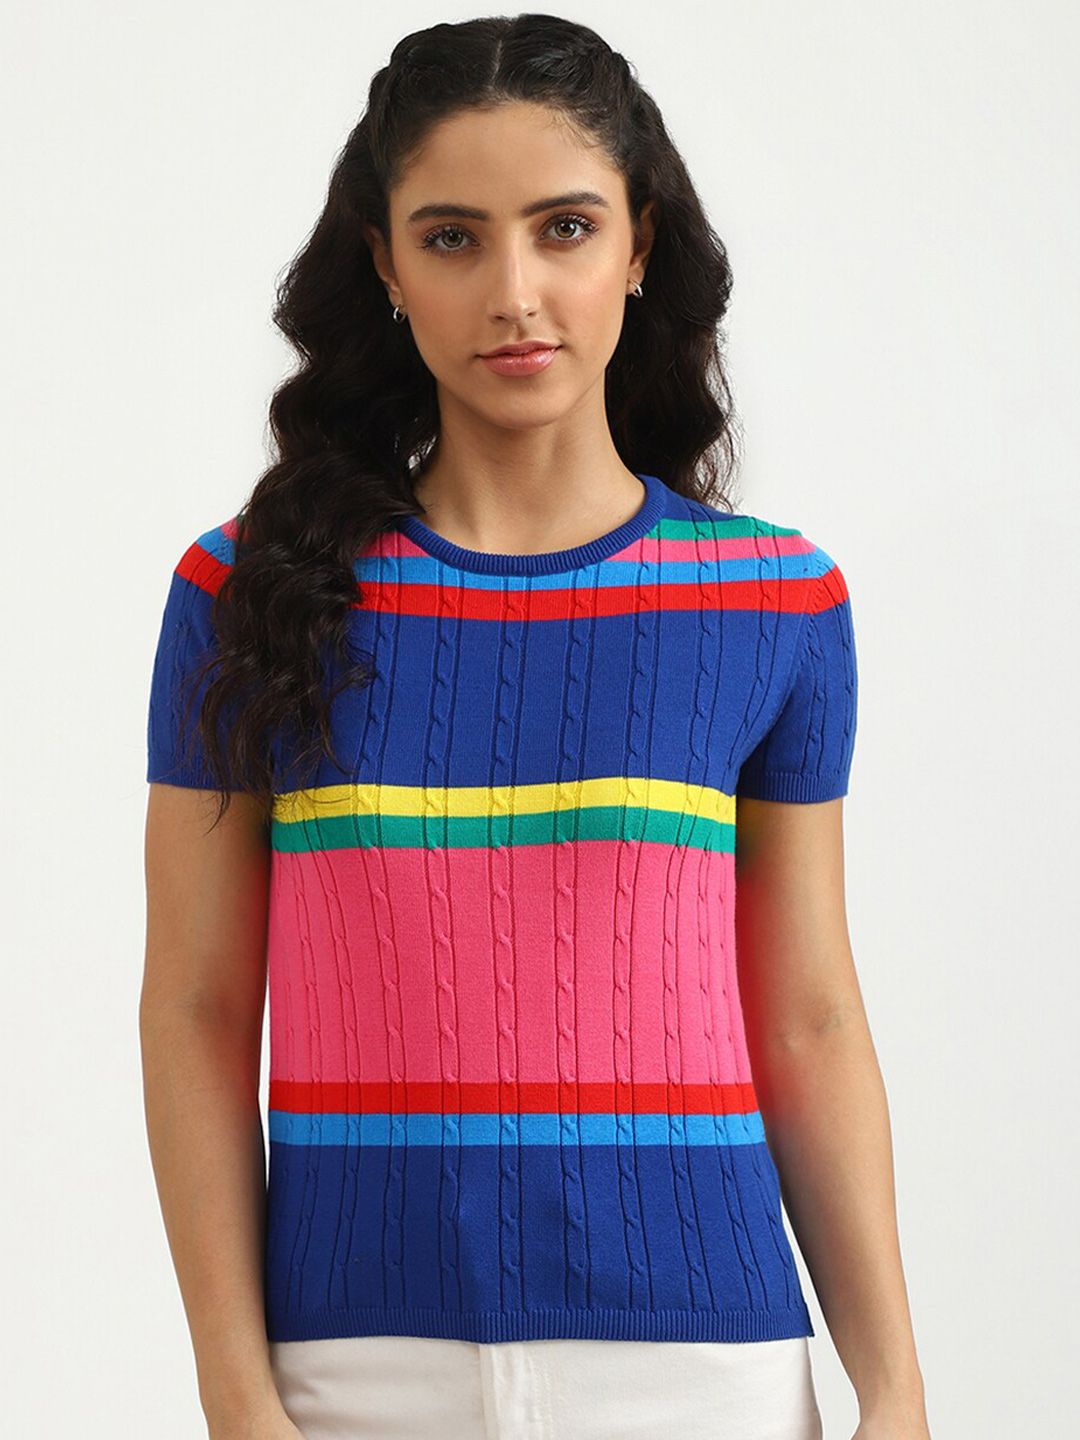 United Colors of Benetton Multicoloured Striped Top Price in India